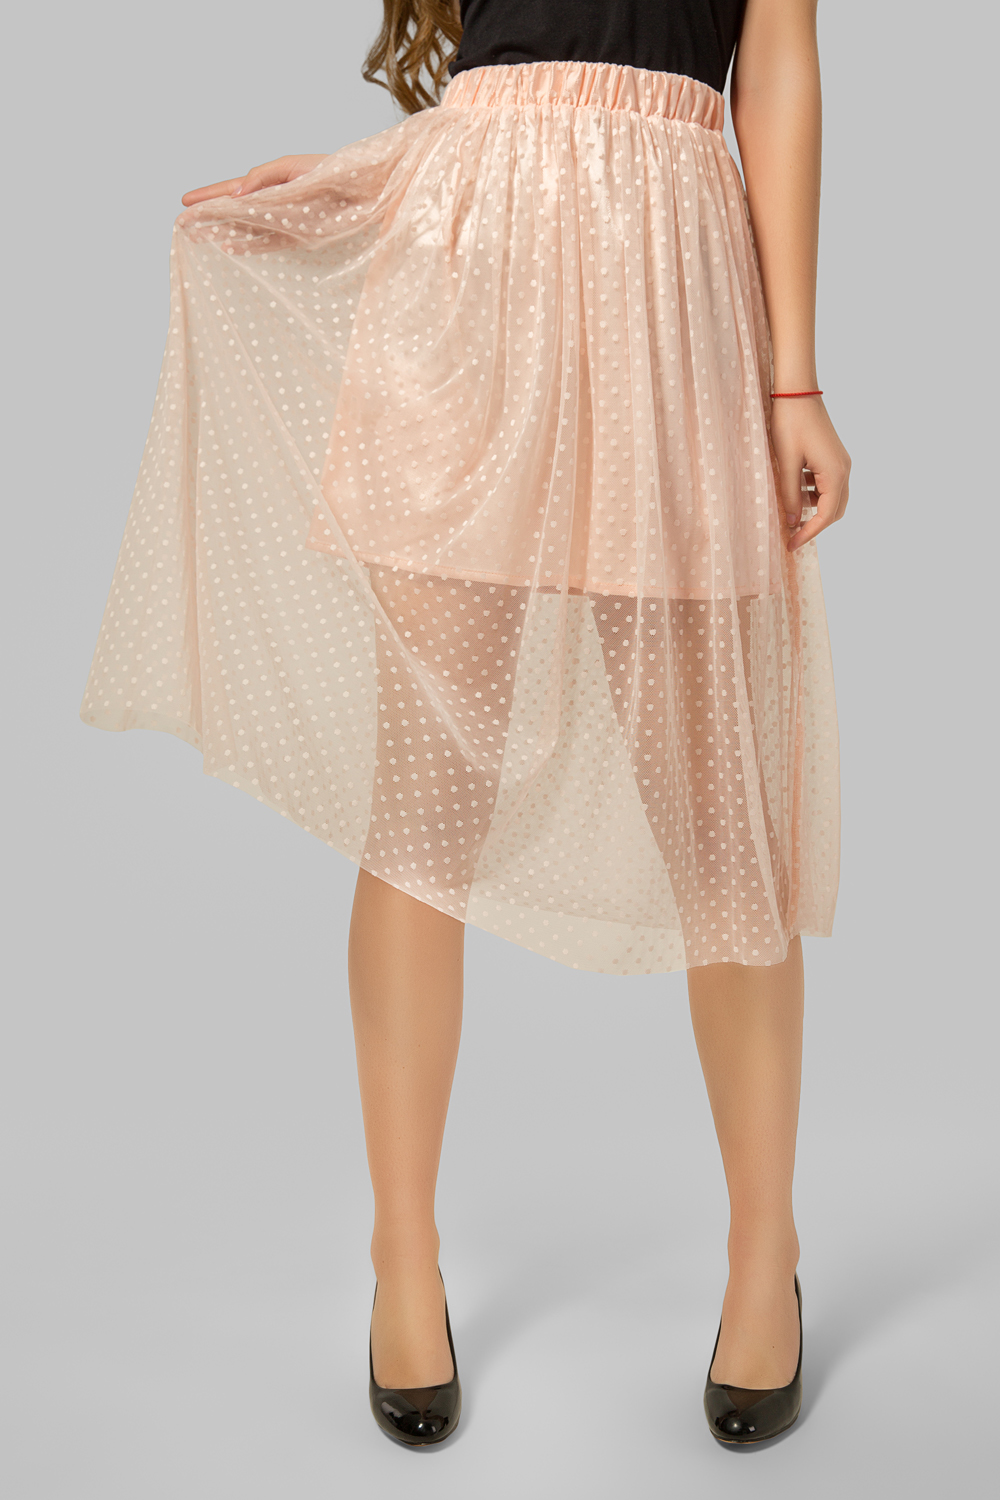 Tutu skirt made of airy tulle in peach colour